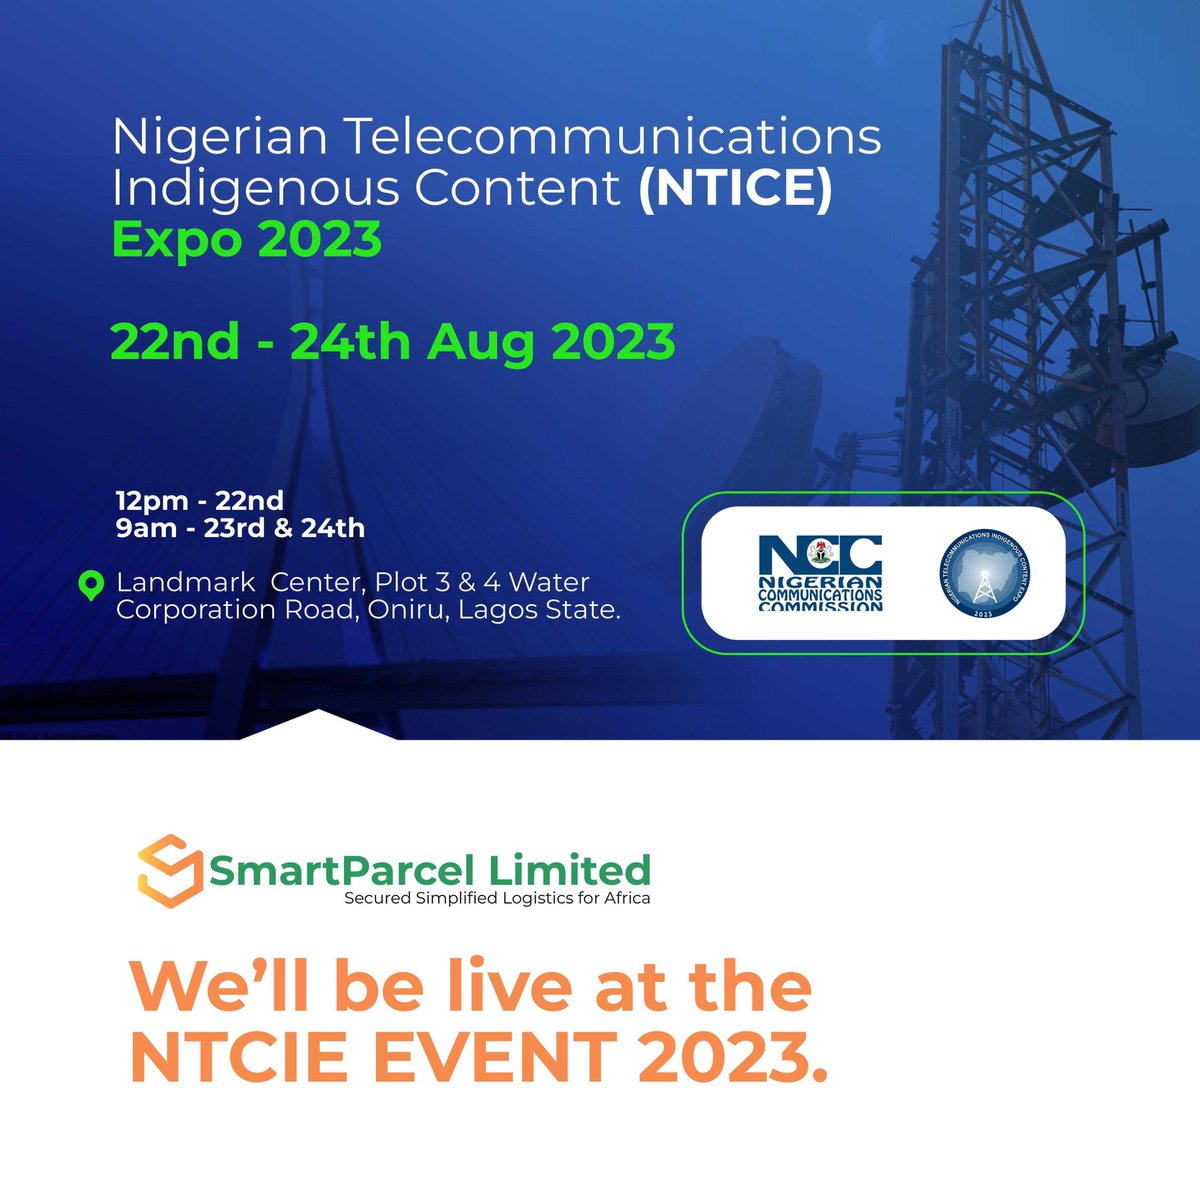 Join us at #NTCIE2023, where innovation meets indigenous telecommunications excellence! 📡🇳🇬 Don’t miss out on this exciting event from August 22nd to 24th at Landmark Center, Lagos. 🗓️ #NTICEExpo #TelecomInnovation #NigeriaTech #SmartParcel #SmartLocker